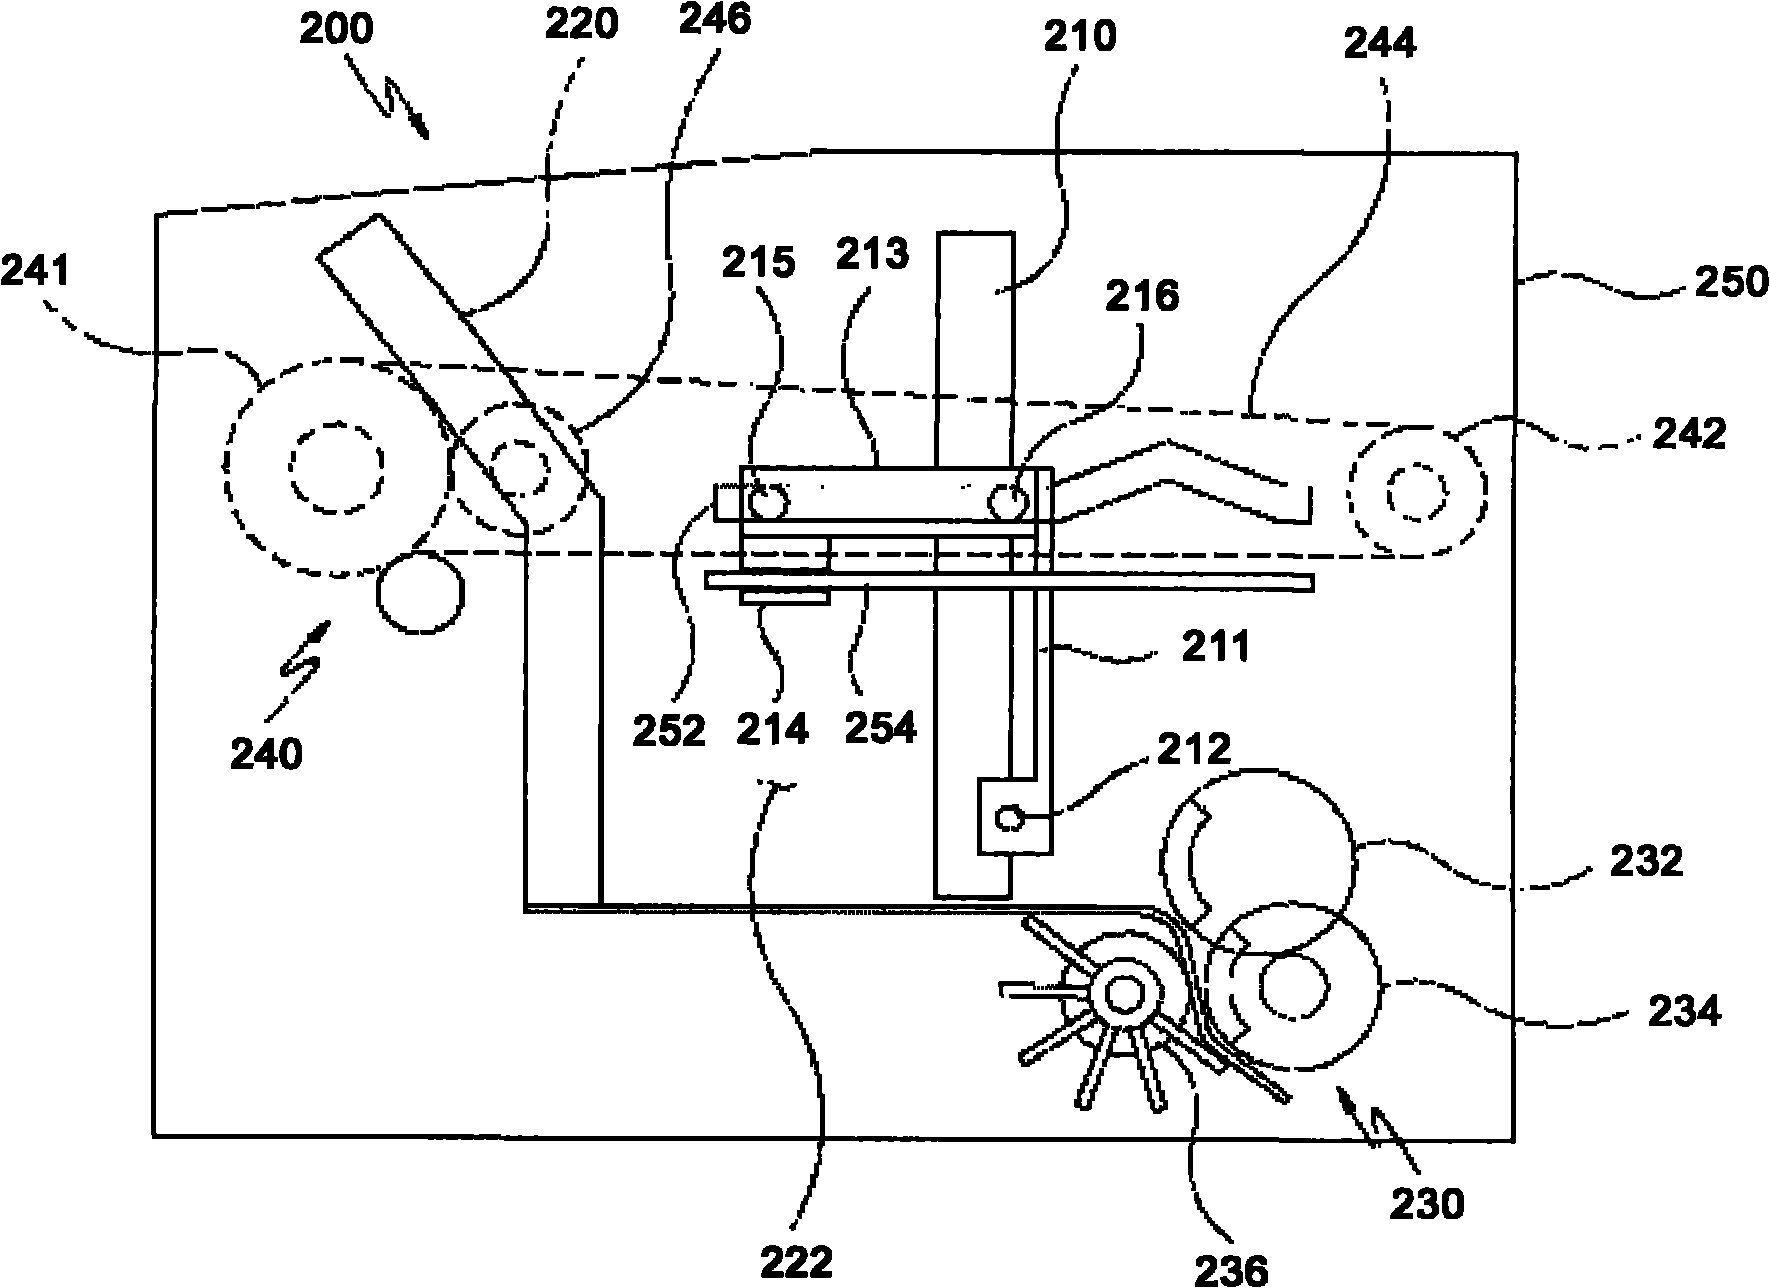 Paper money deposit and withdrawal device for an automated teller machine